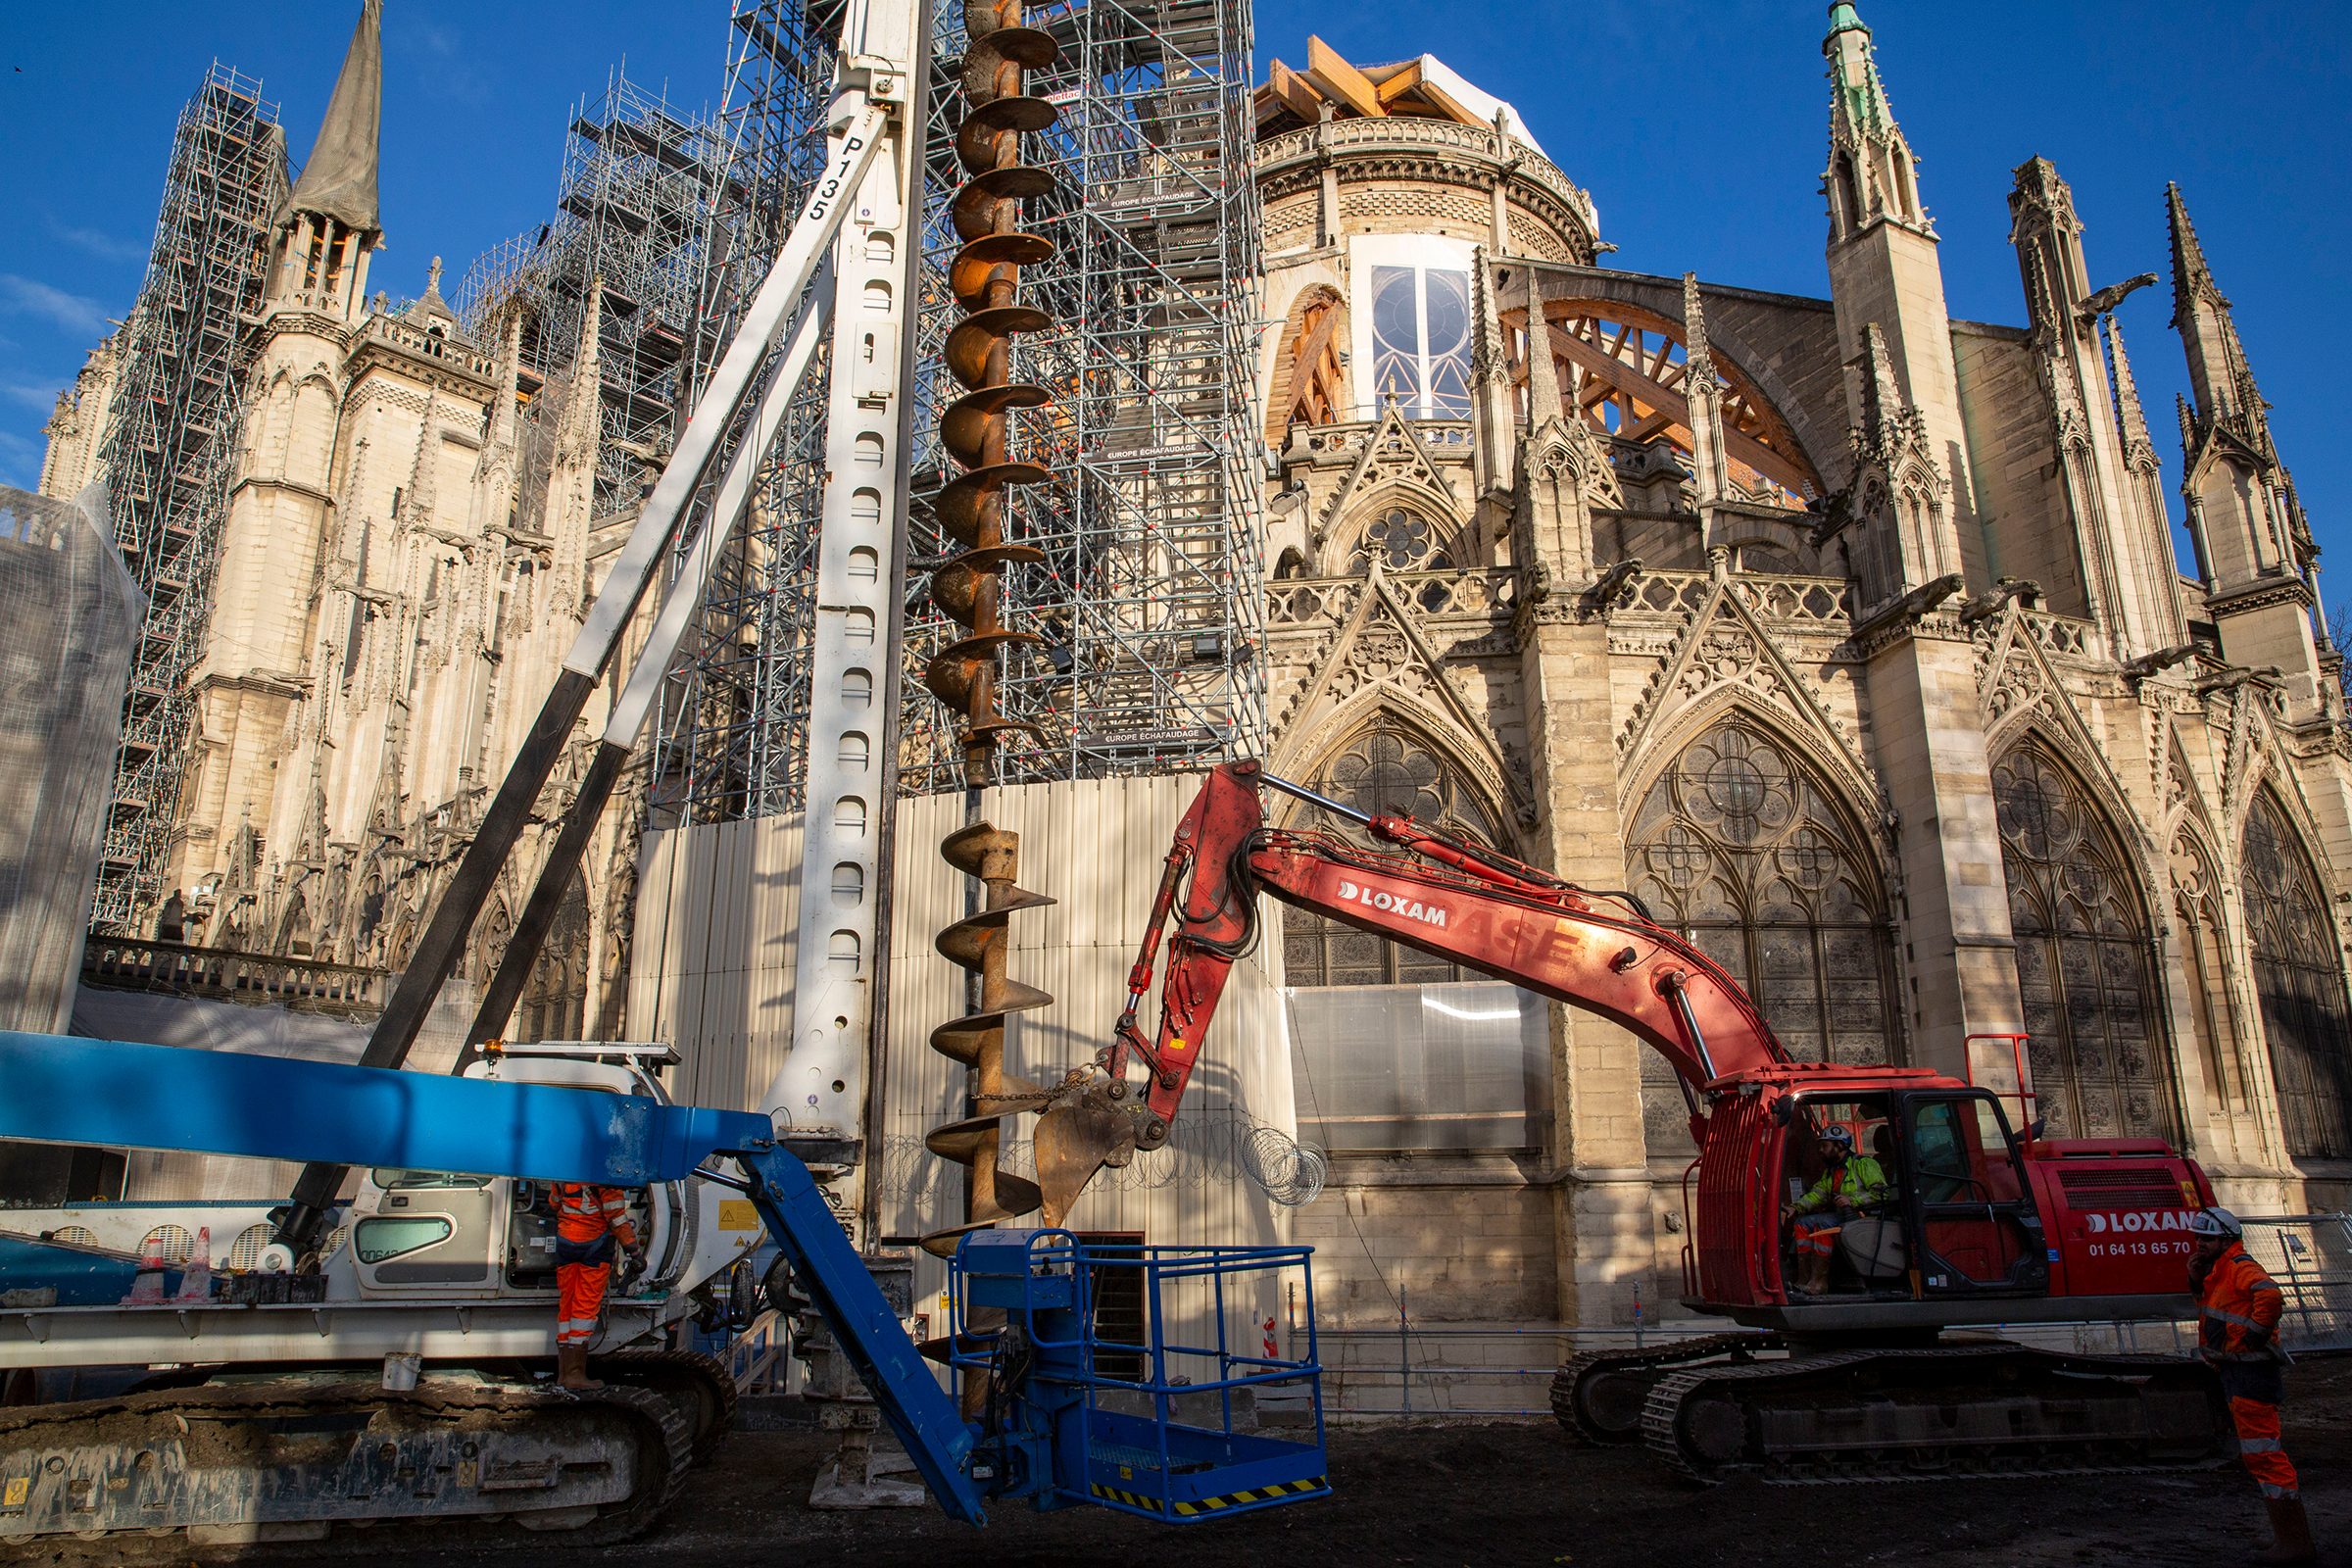 Construction work at the cathedral in December. "The aim is to reopen the cathedral in 2024 even though the work won’t all be done,” says Stéphane Tissier, director of operations for Notre-Dame’s reconstruction.